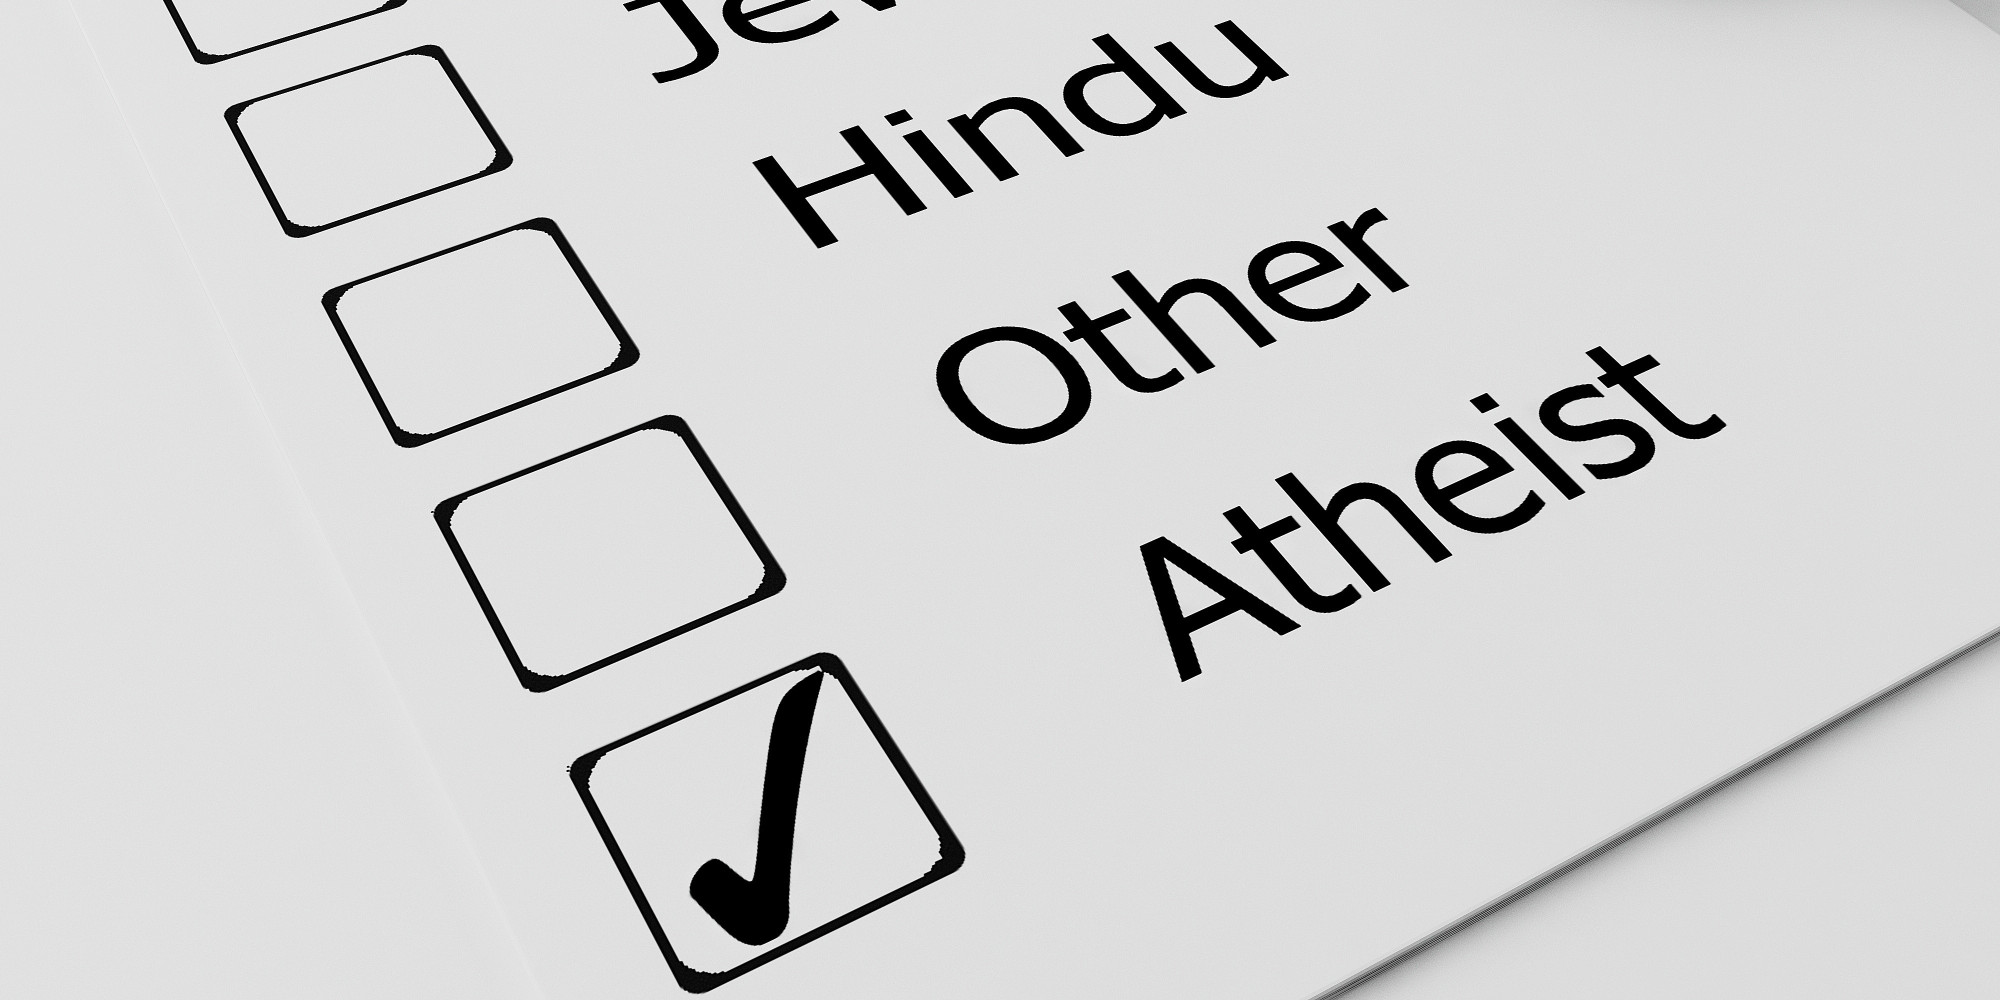 Can Atheism Replace Religion? HuffPost